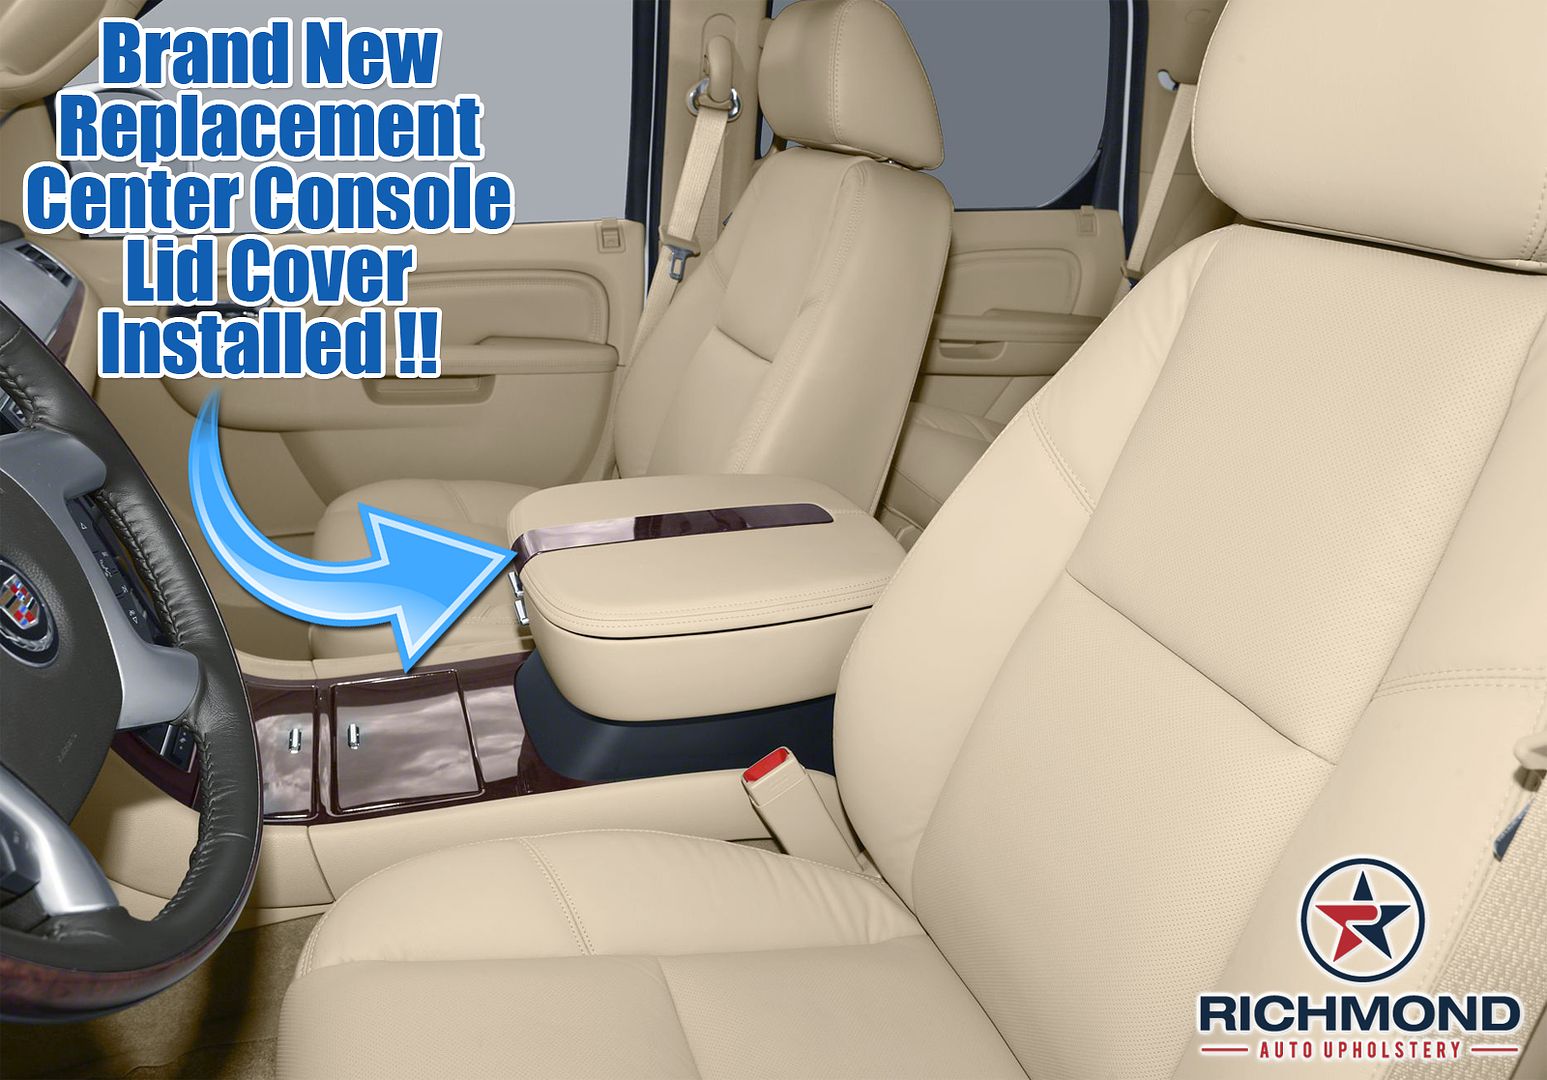  photo 2007-2008-Cadillac-Escalade-Center-Console-Lid-Replacement-Leather-Cover-
Tan-9_zpsynsgvacm.jpg